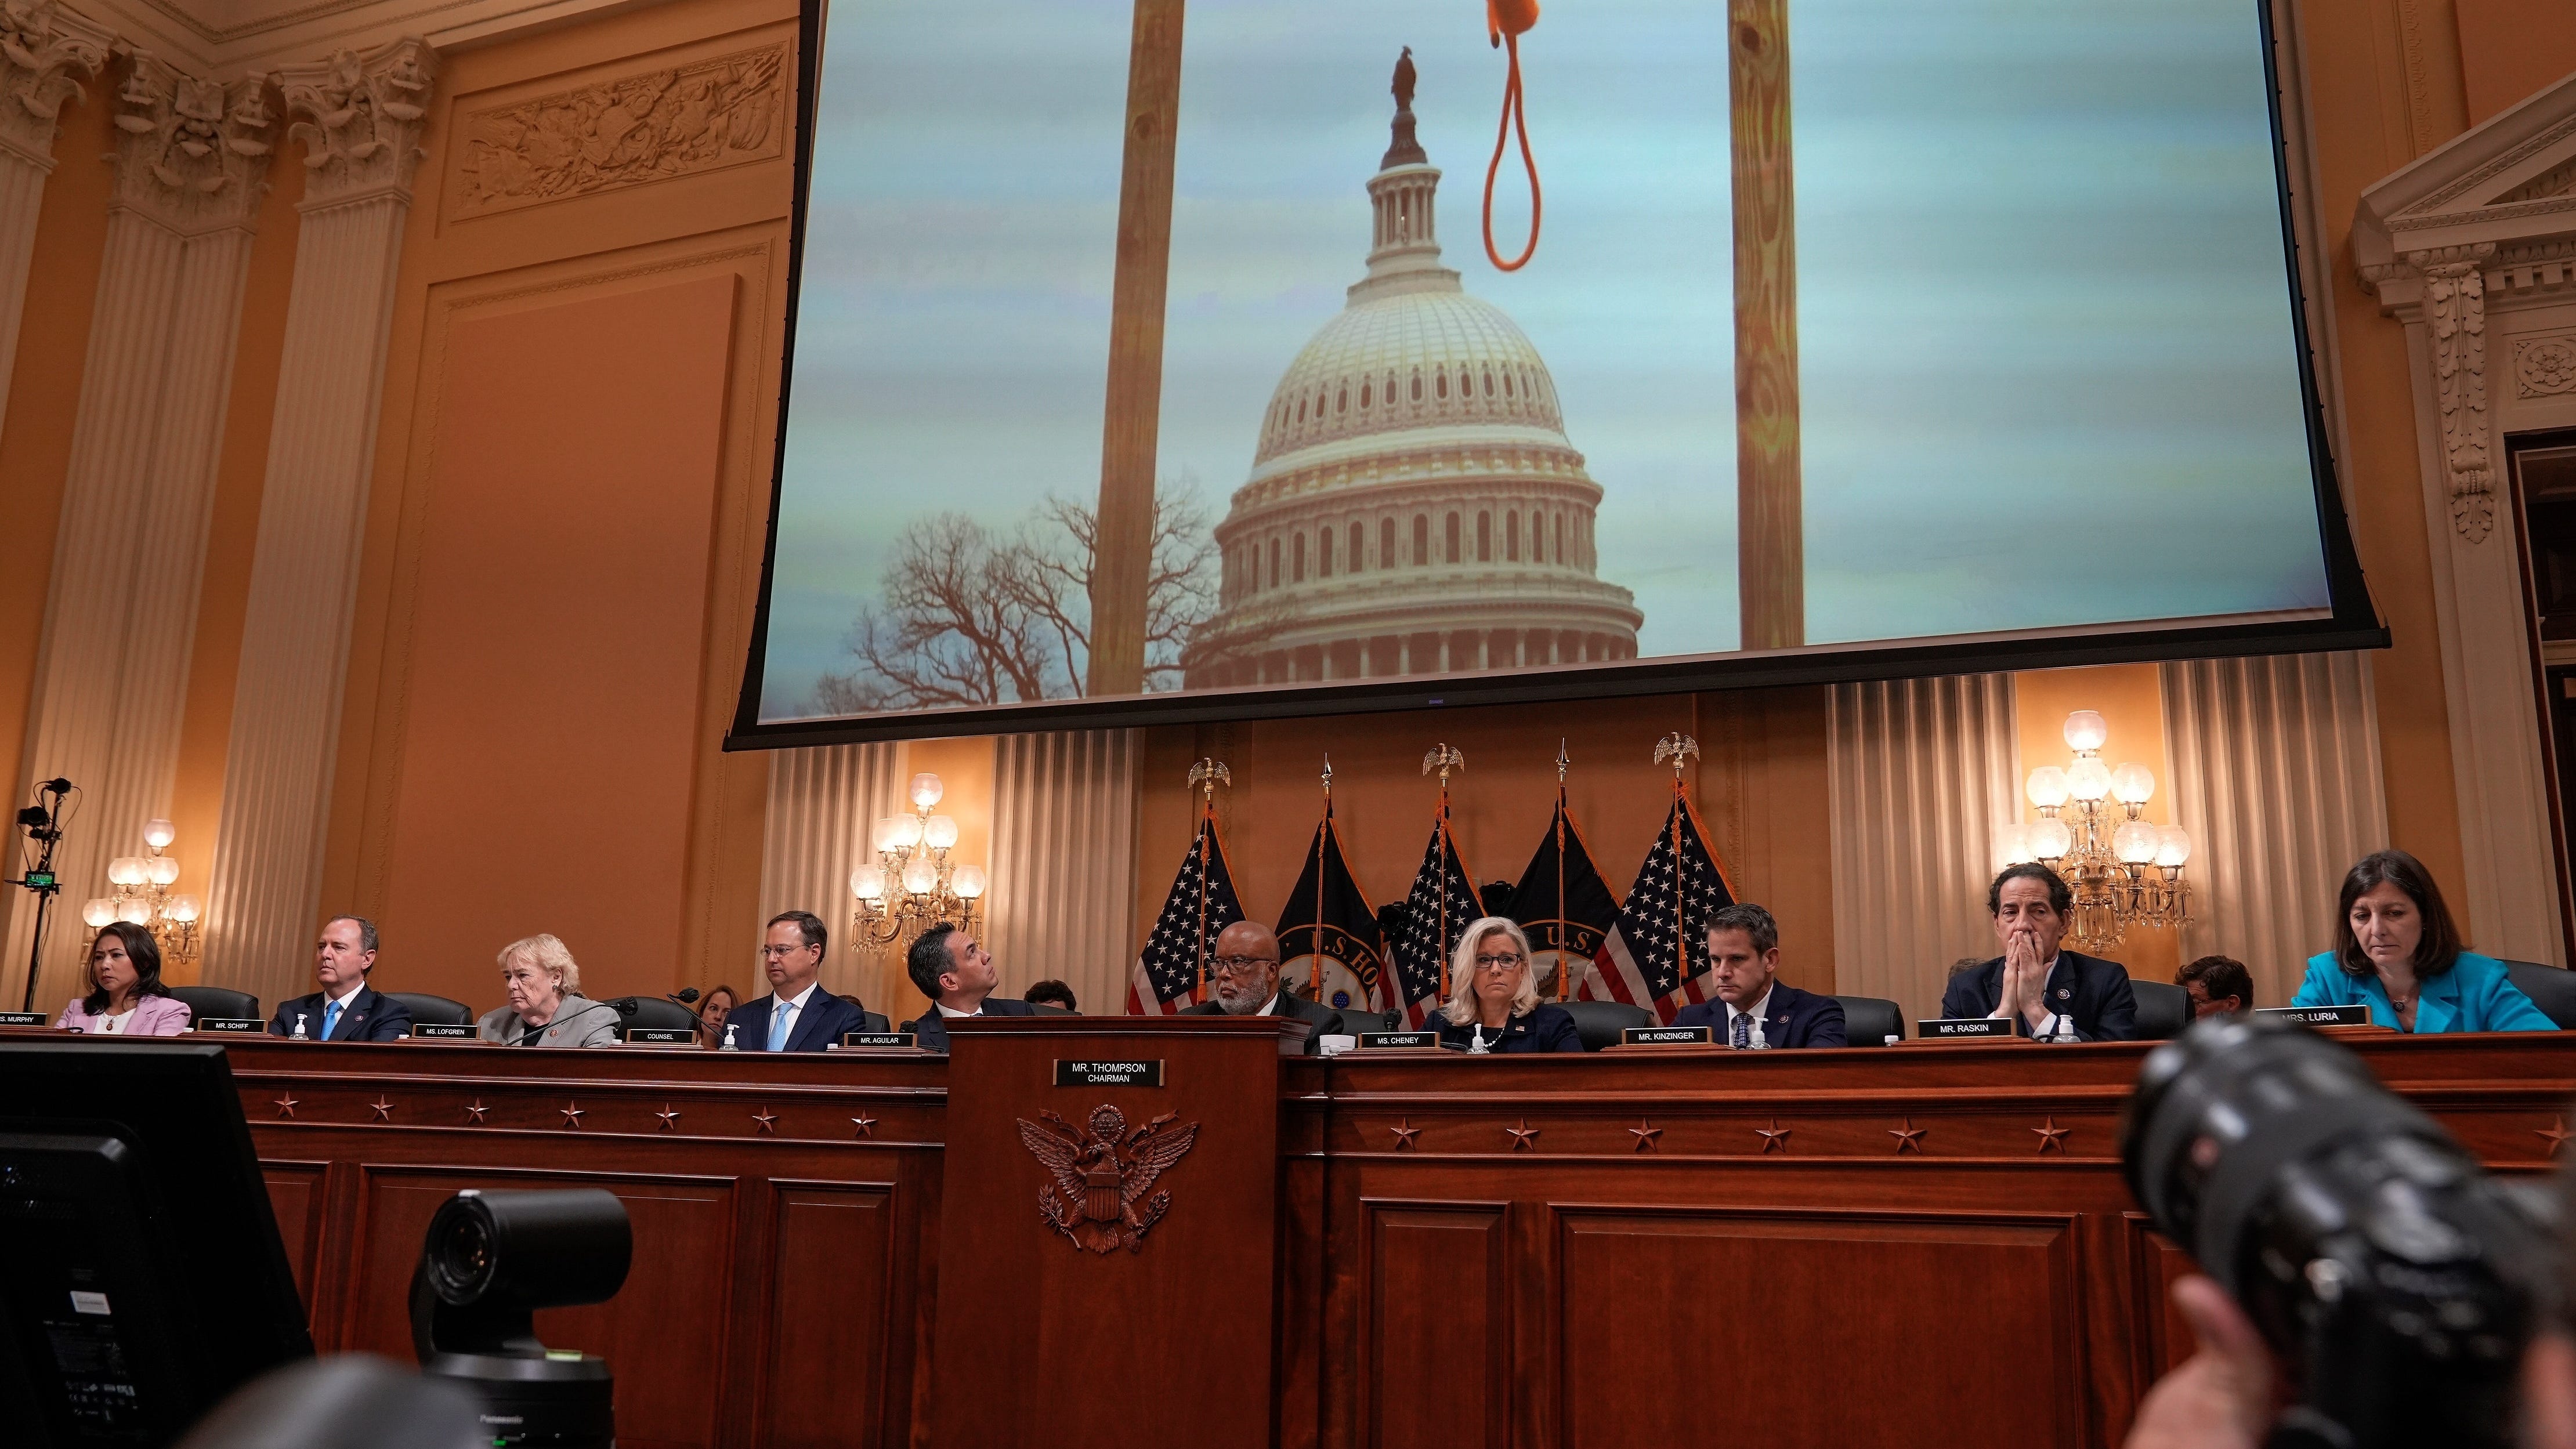 June 20, 2022:  A video plays showing an image from Jan. 6, 2021 of a gallows in front of the U.S. Capitol on a large screen during the opening moments of the House select committee to investigate the Jan.6th attack on the Capitol.